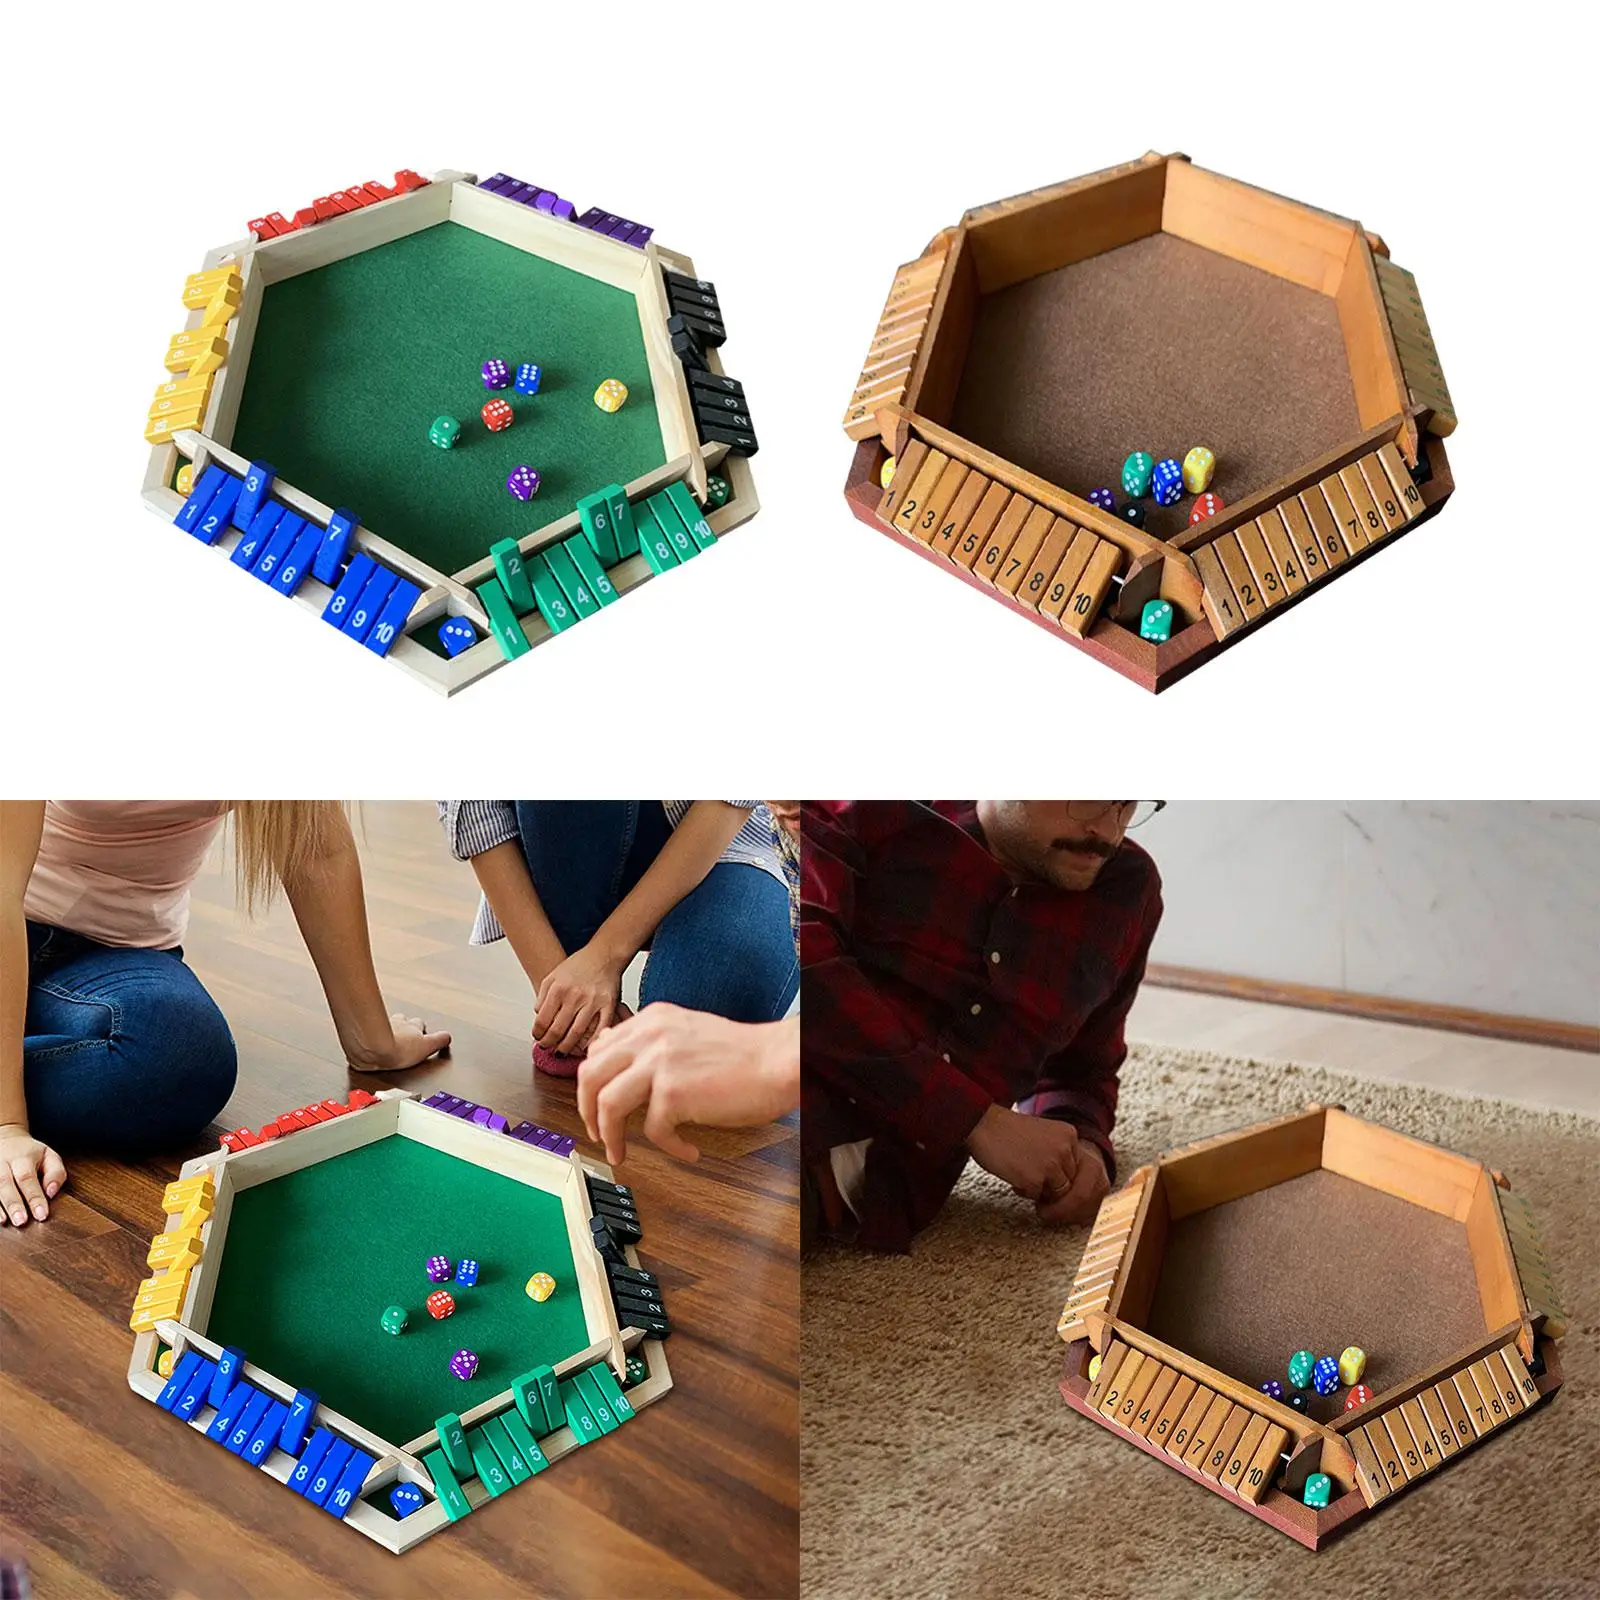 Wooden Table Dice Games 2-6 Players Wooden Table Board for Family Party